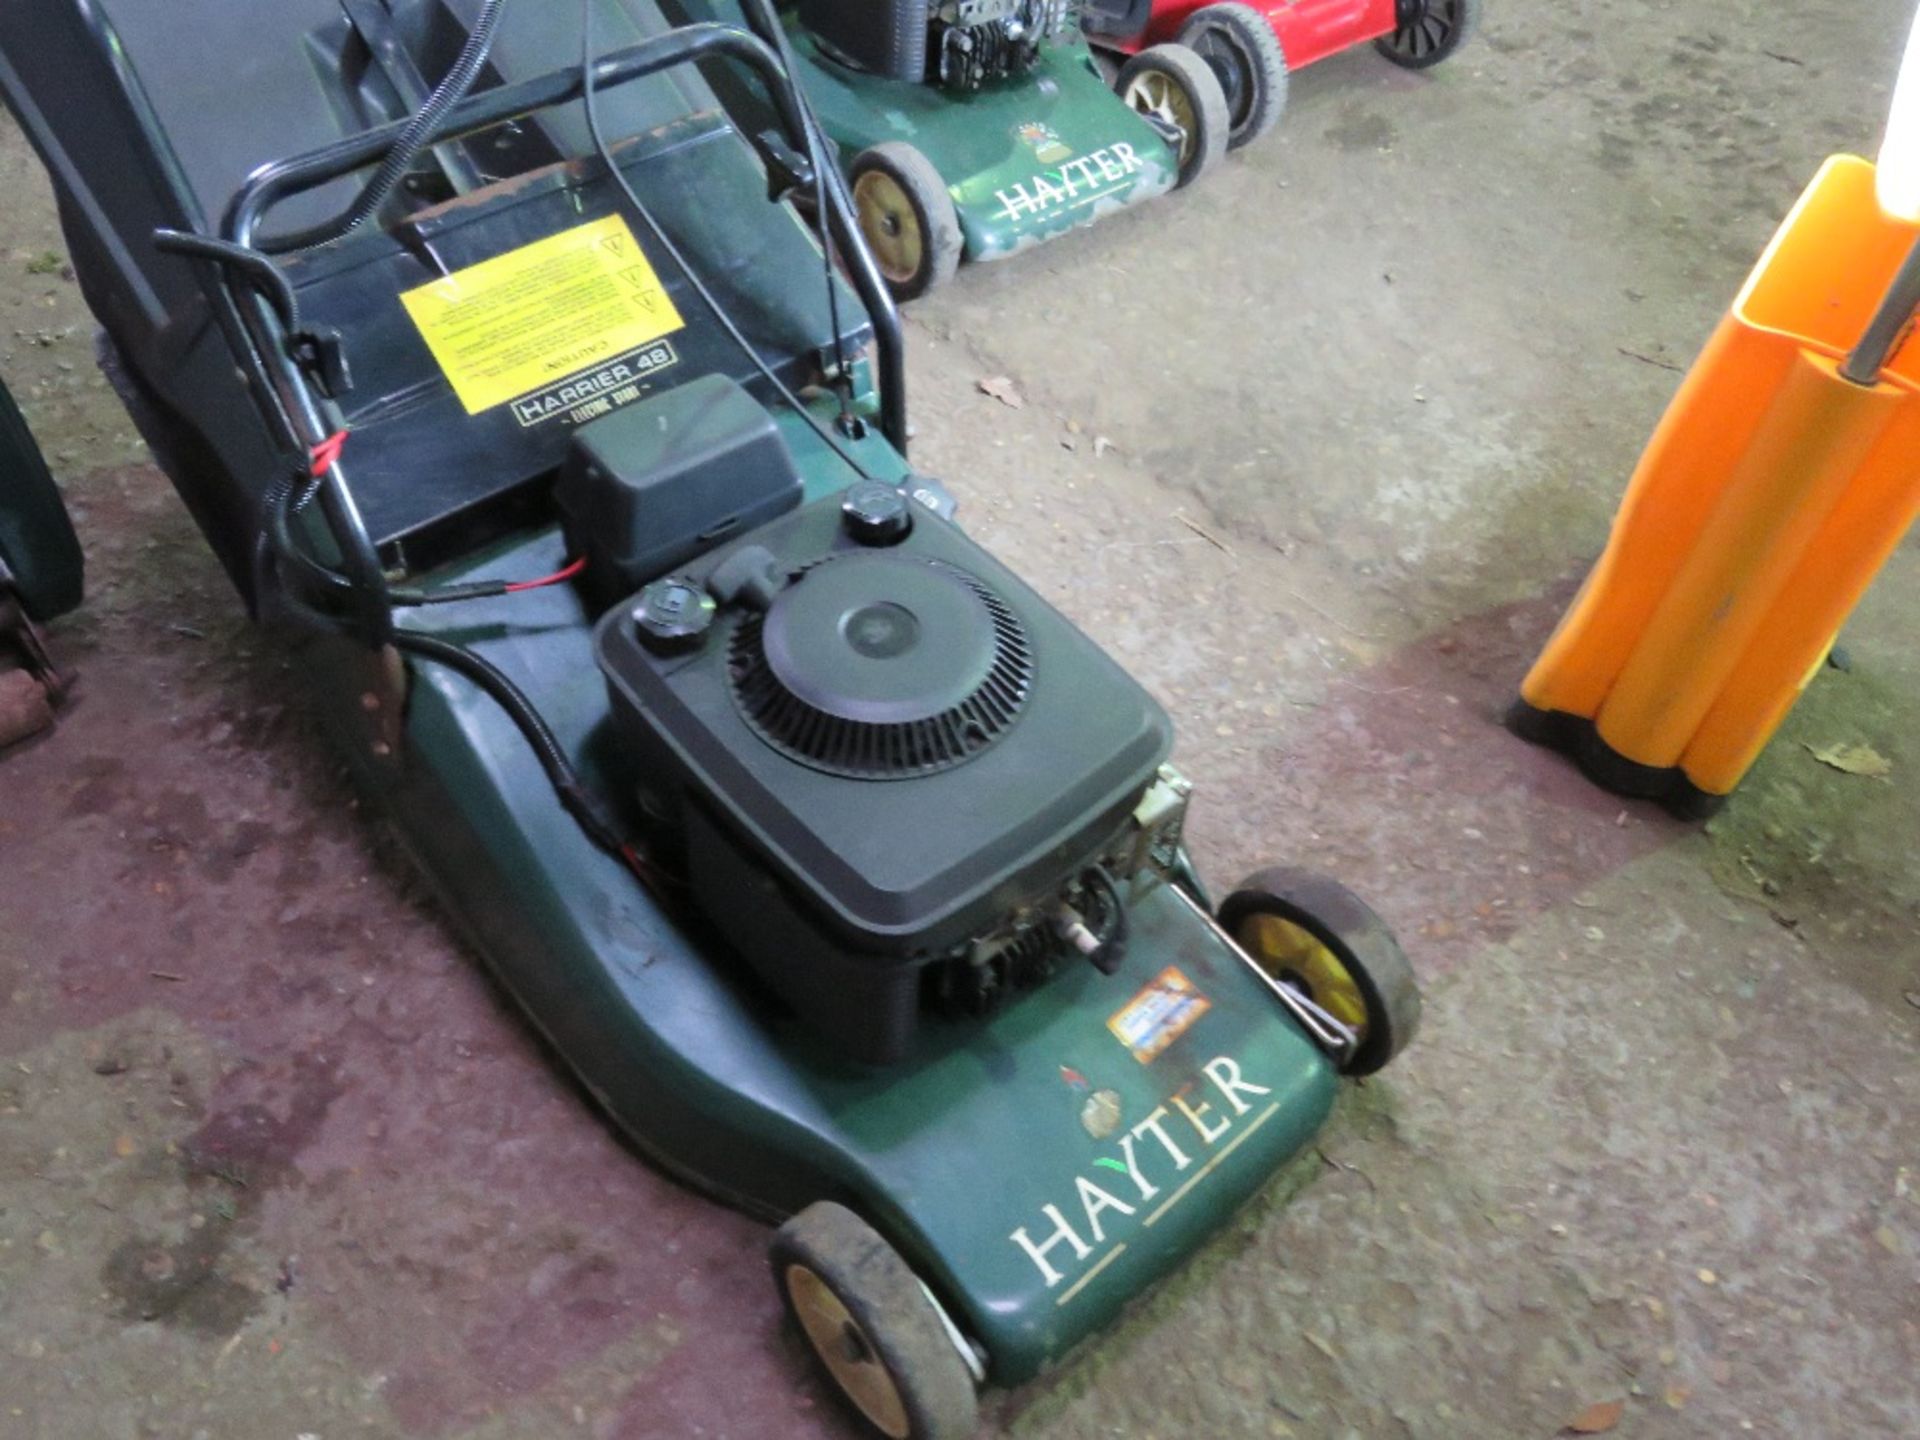 HAYTER HARRIER 48 ELECTRIC START ROLLER PETROL MOWER, WITH BOX/COLLECTOR. THIS LOT IS SOLD UNDER TH - Image 3 of 4